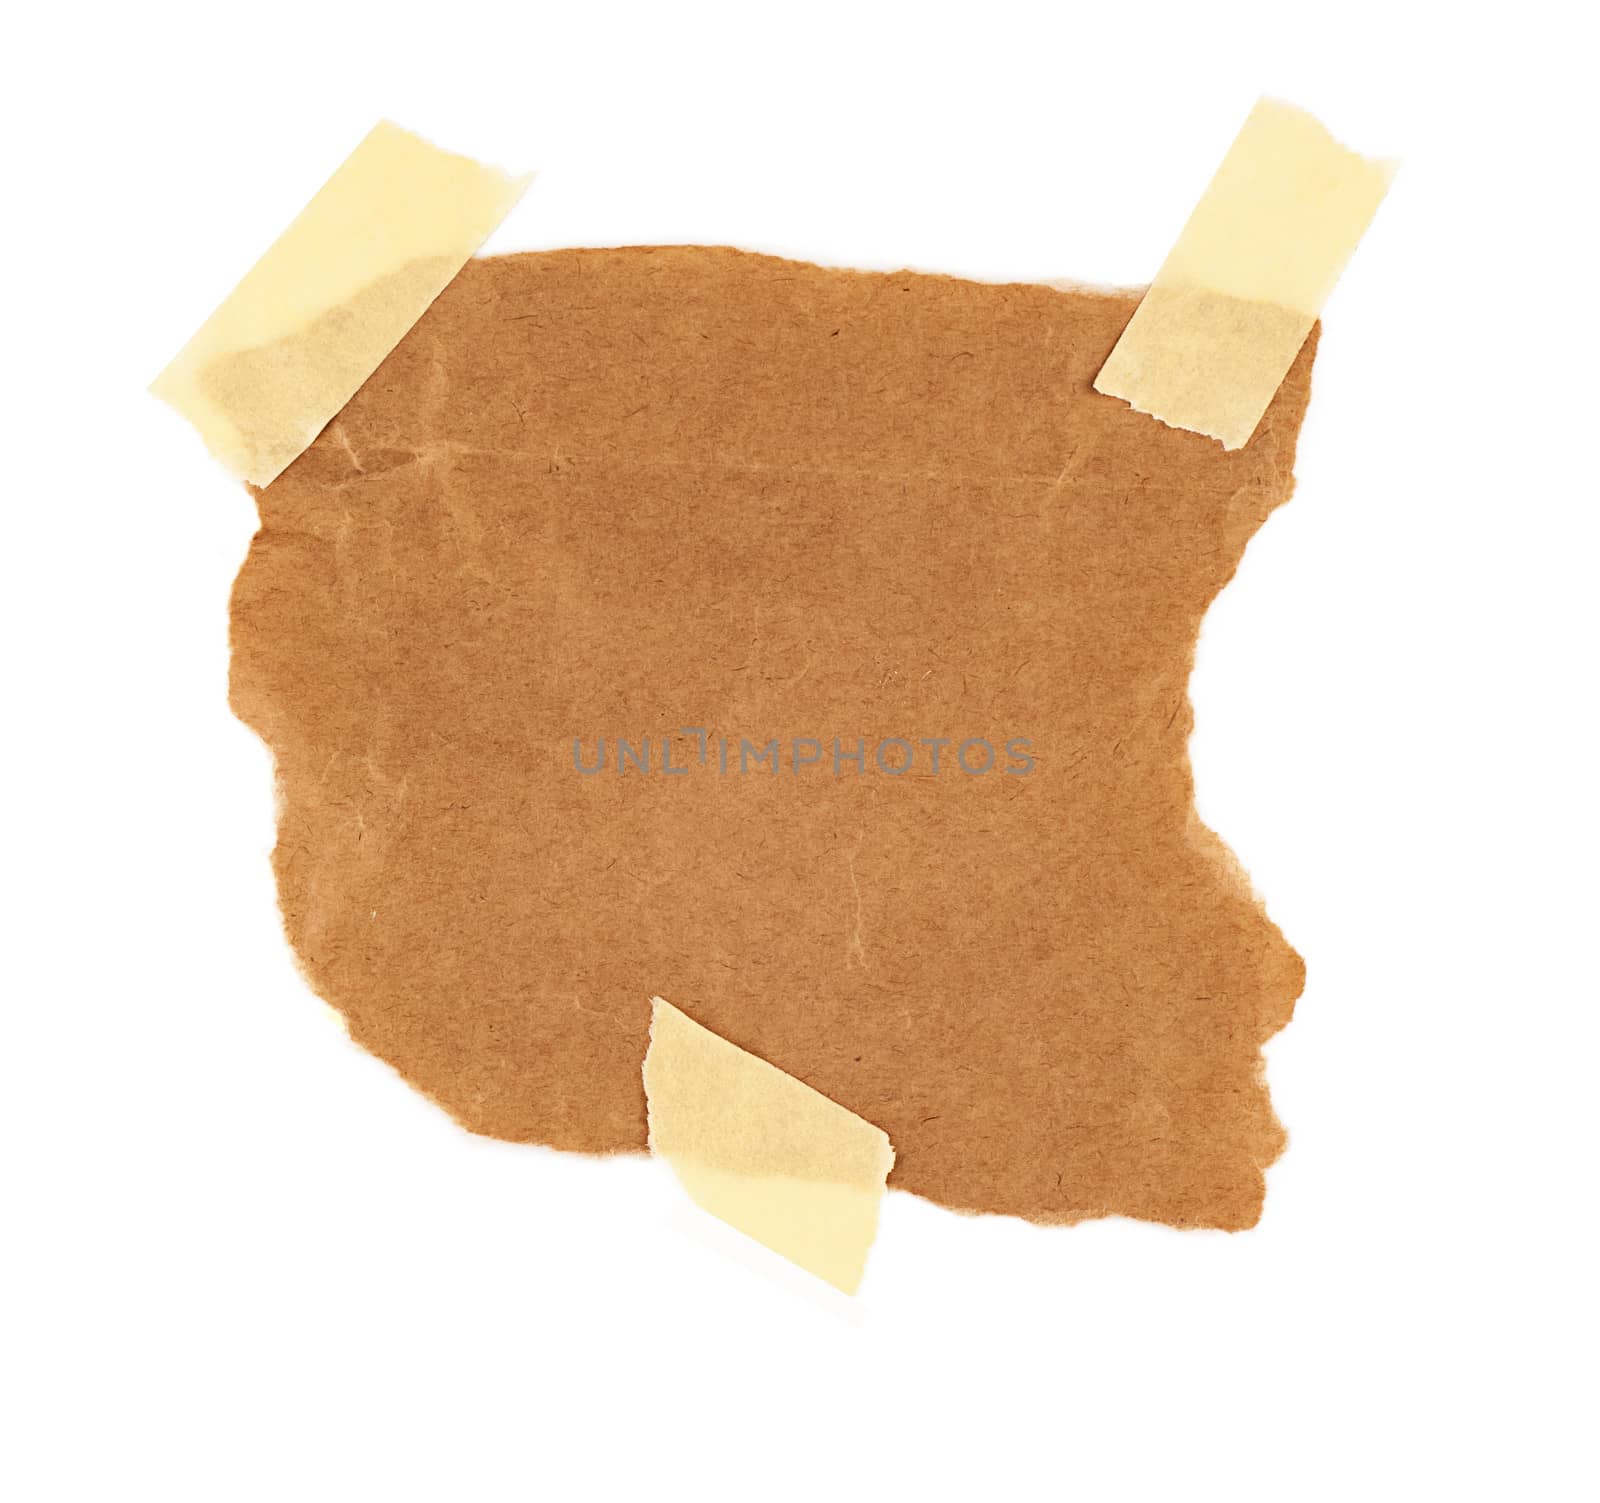 Collection of a cardboard pieces isolated on white background